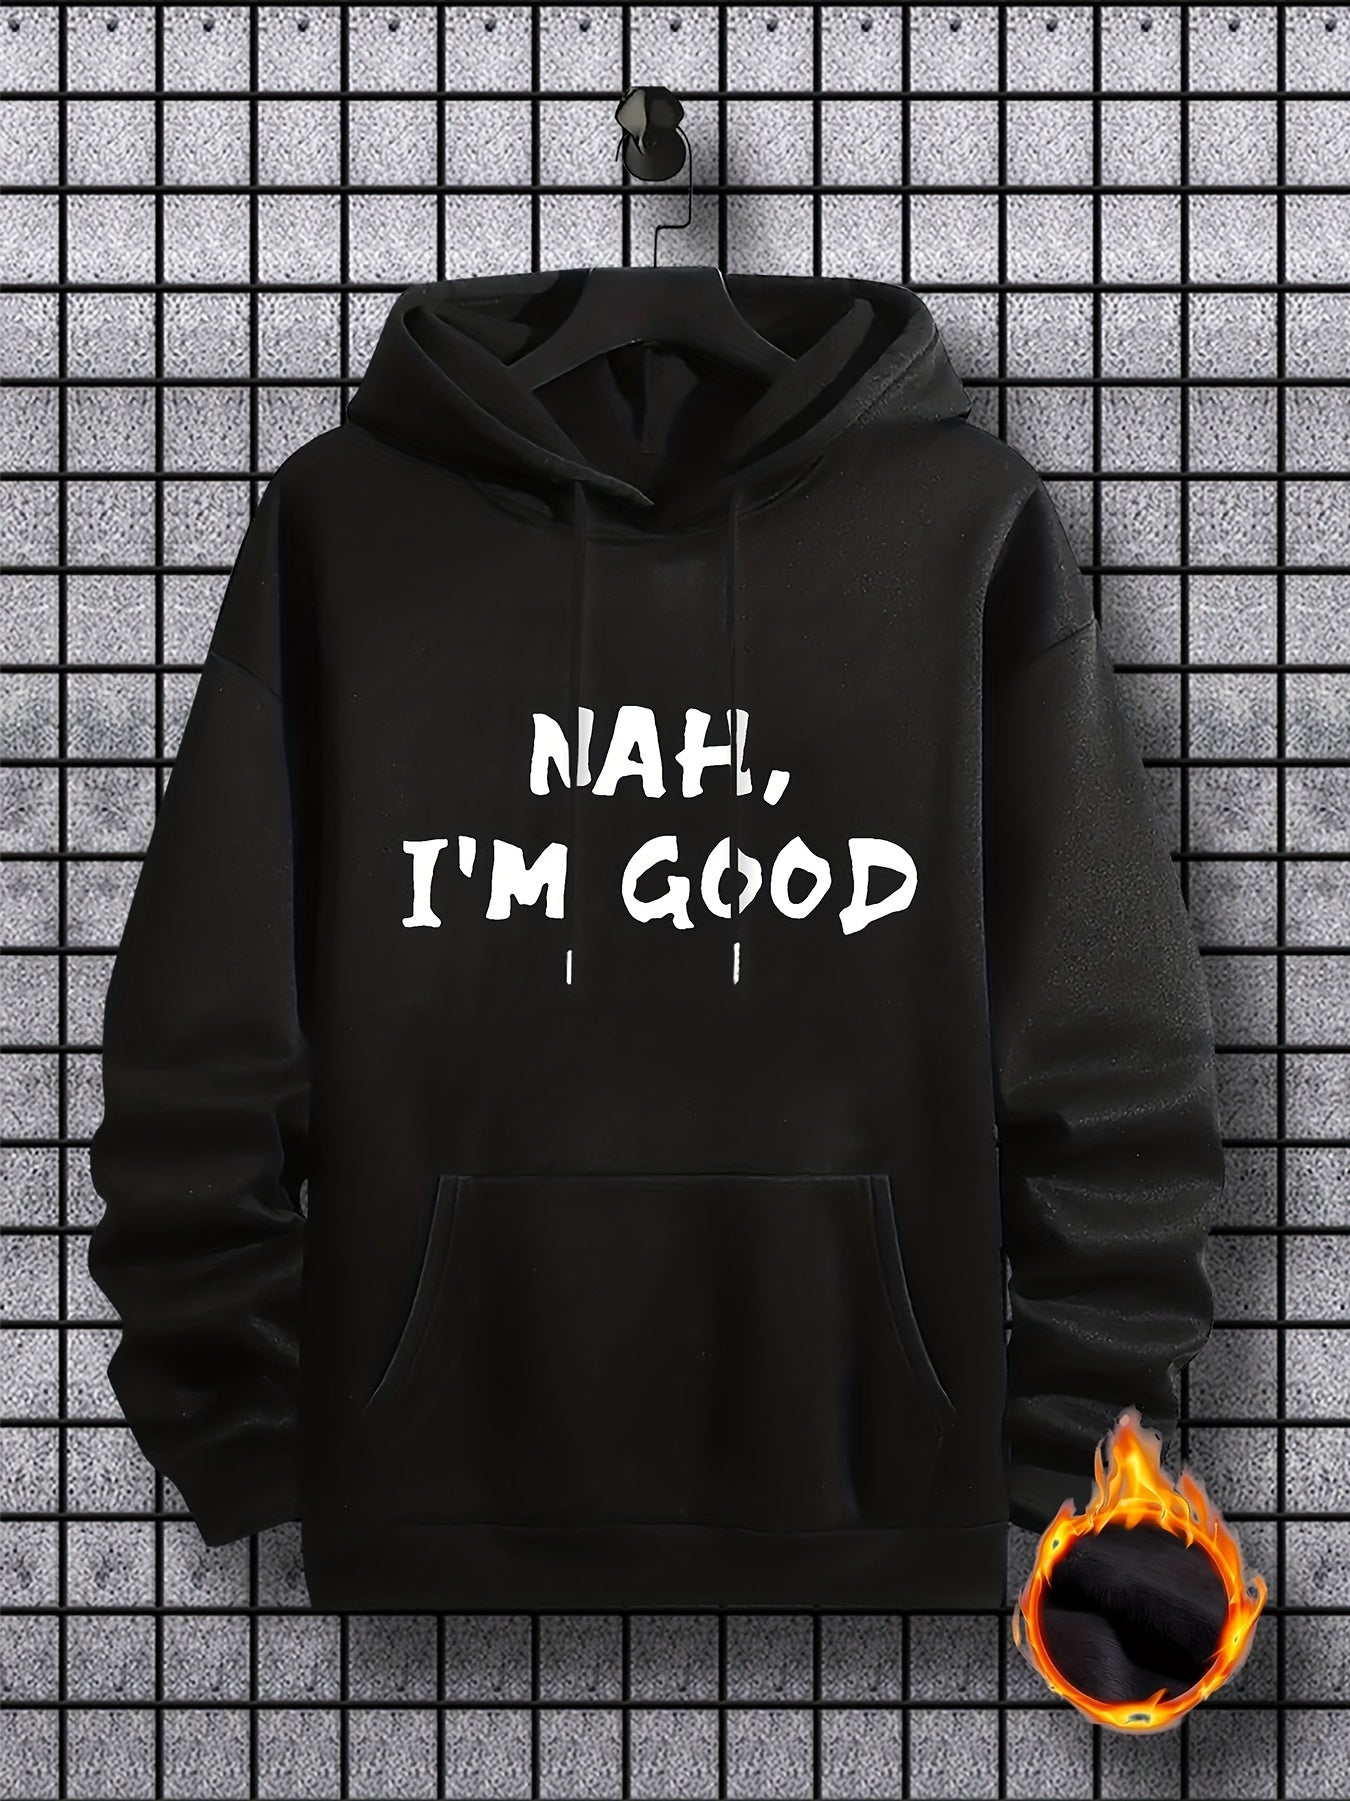 I'm Good Print Hoodie, Cool Hoodies For Men, Men's Casual Graphic Design Pullover Hooded Sweatshirt With Kangaroo Pocket Streetwear For Winter Fall, As Gifts